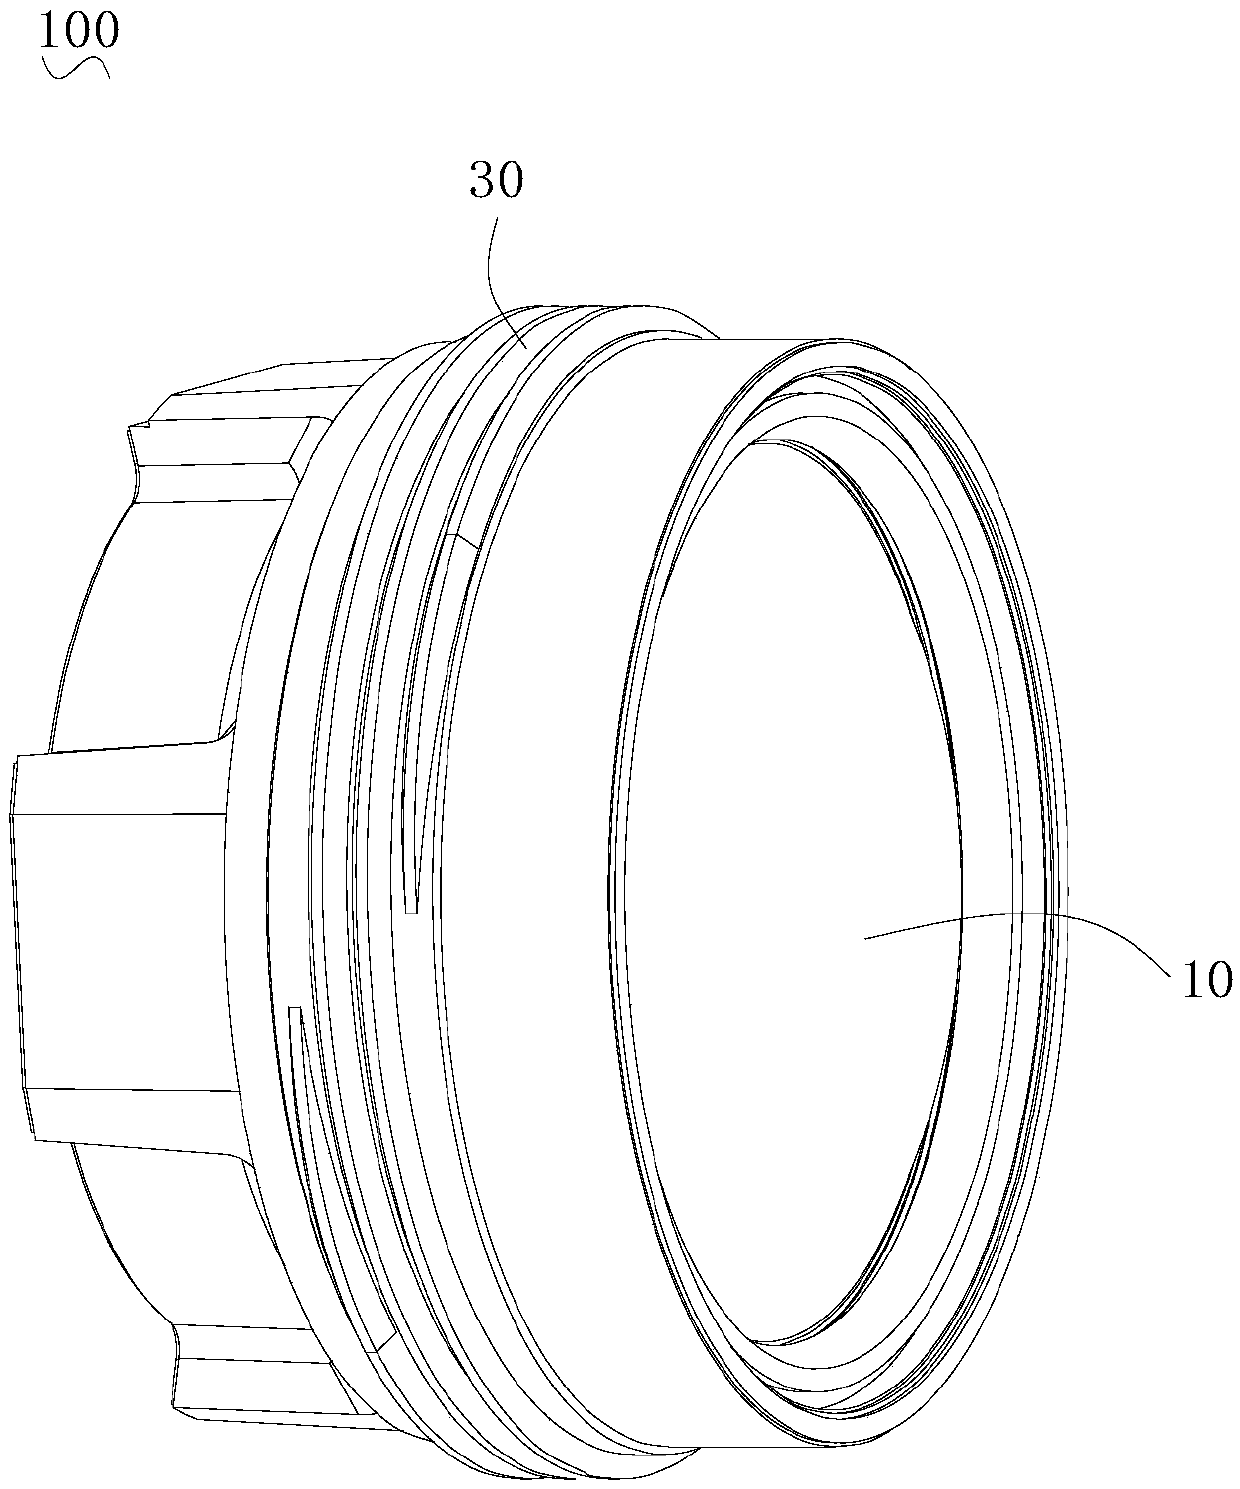 Lens group and camera lens module